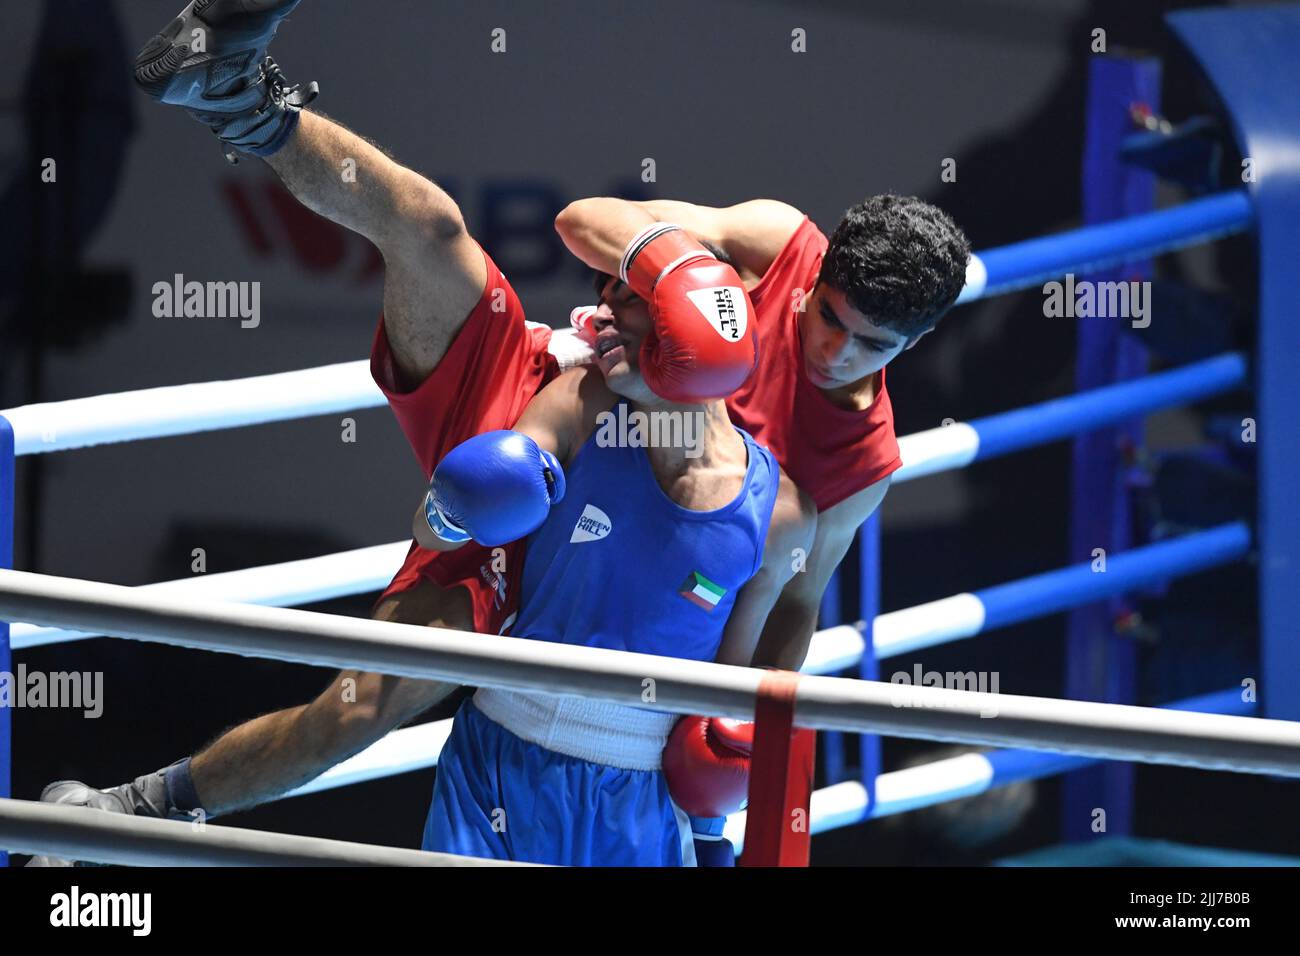 Mubarak Al Kabeer Governorate. 24th July, 2022. Abbas Sayed Fadhel (above) of Bahrain fights against Mbarek Mansour of Kuwait in the men's 51kg match at the first Kuwait International Boxing Championship in Mubarak Al-Kabeer Governorate, Kuwait, July 23, 2022. Credit: Ghazy Qaffaf/Xinhua/Alamy Live News Stock Photo